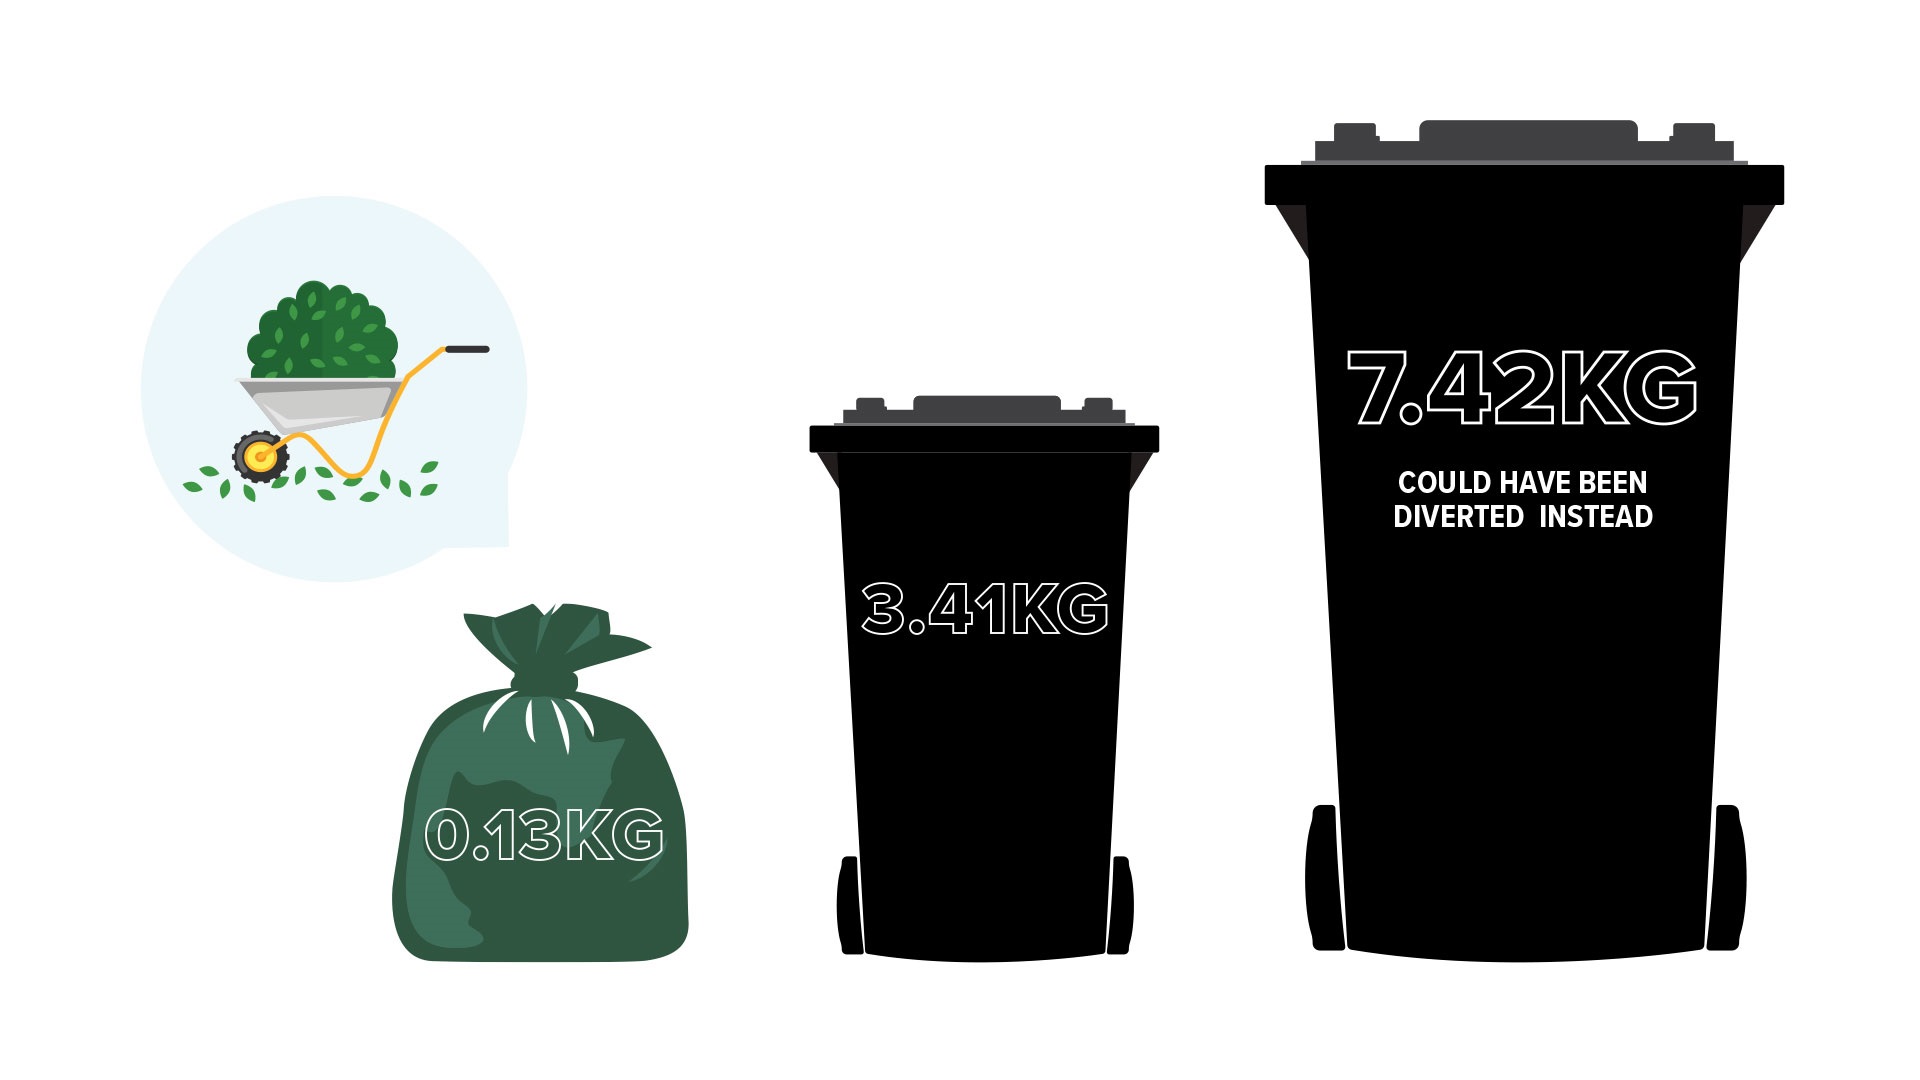 Infographic shows the comparison between how much green waste is thrown out in a typical rubbish bag (0.13kg), small bin (3.41kg) and large bin (7.42kg).